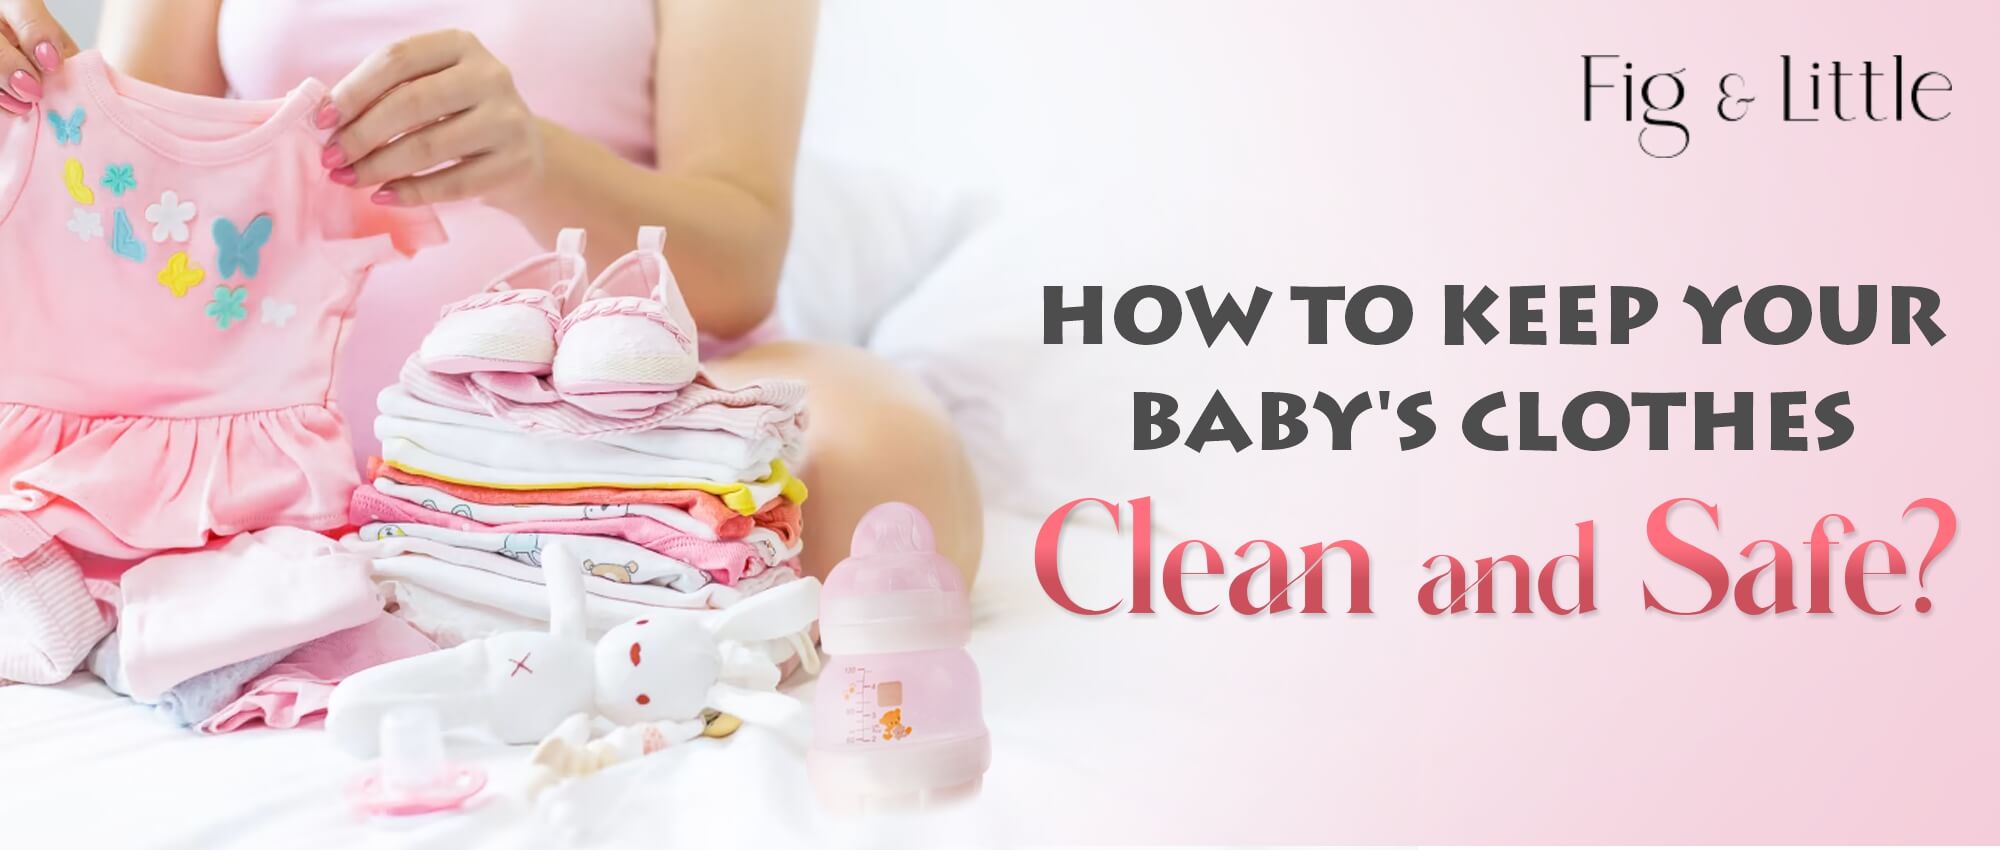 HOW TO KEEP YOUR BABY'S CLOTHES CLEAN AND SAFE?